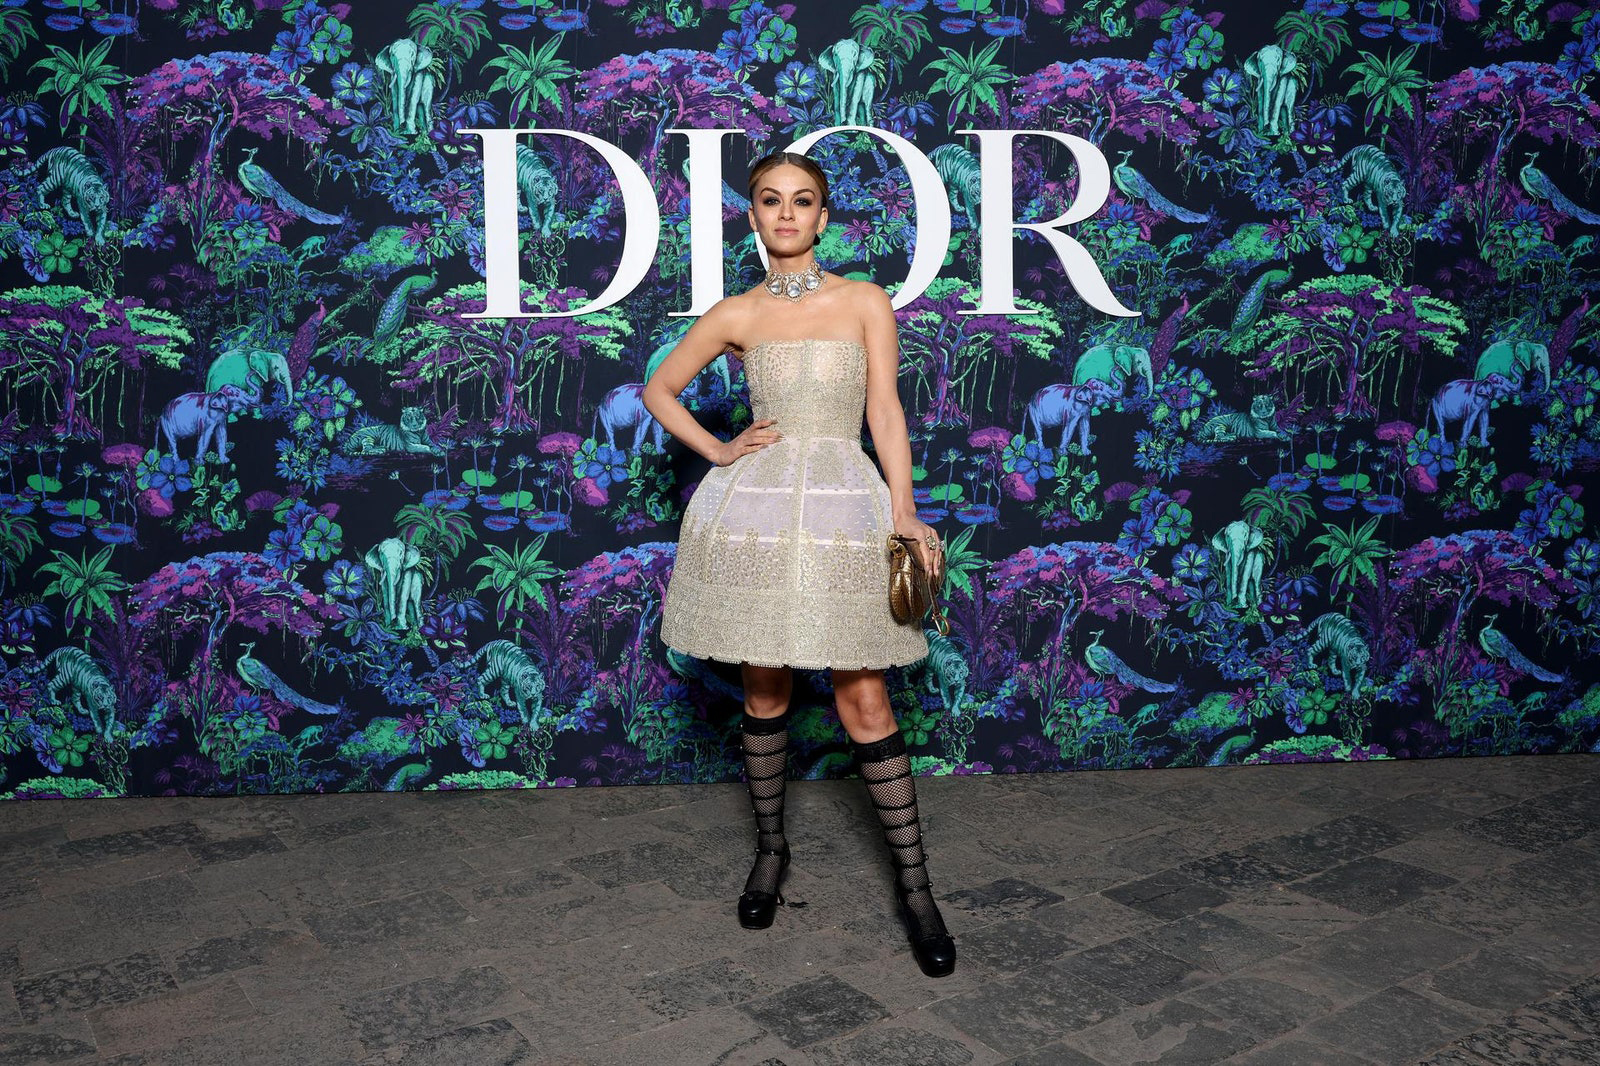 Dior Fall/Winter 2023 Show In Mumbai Natasha Poonawalla wore a Dior Spring-Summer 2023 beige tulle dress with a Dior bag and shoes.